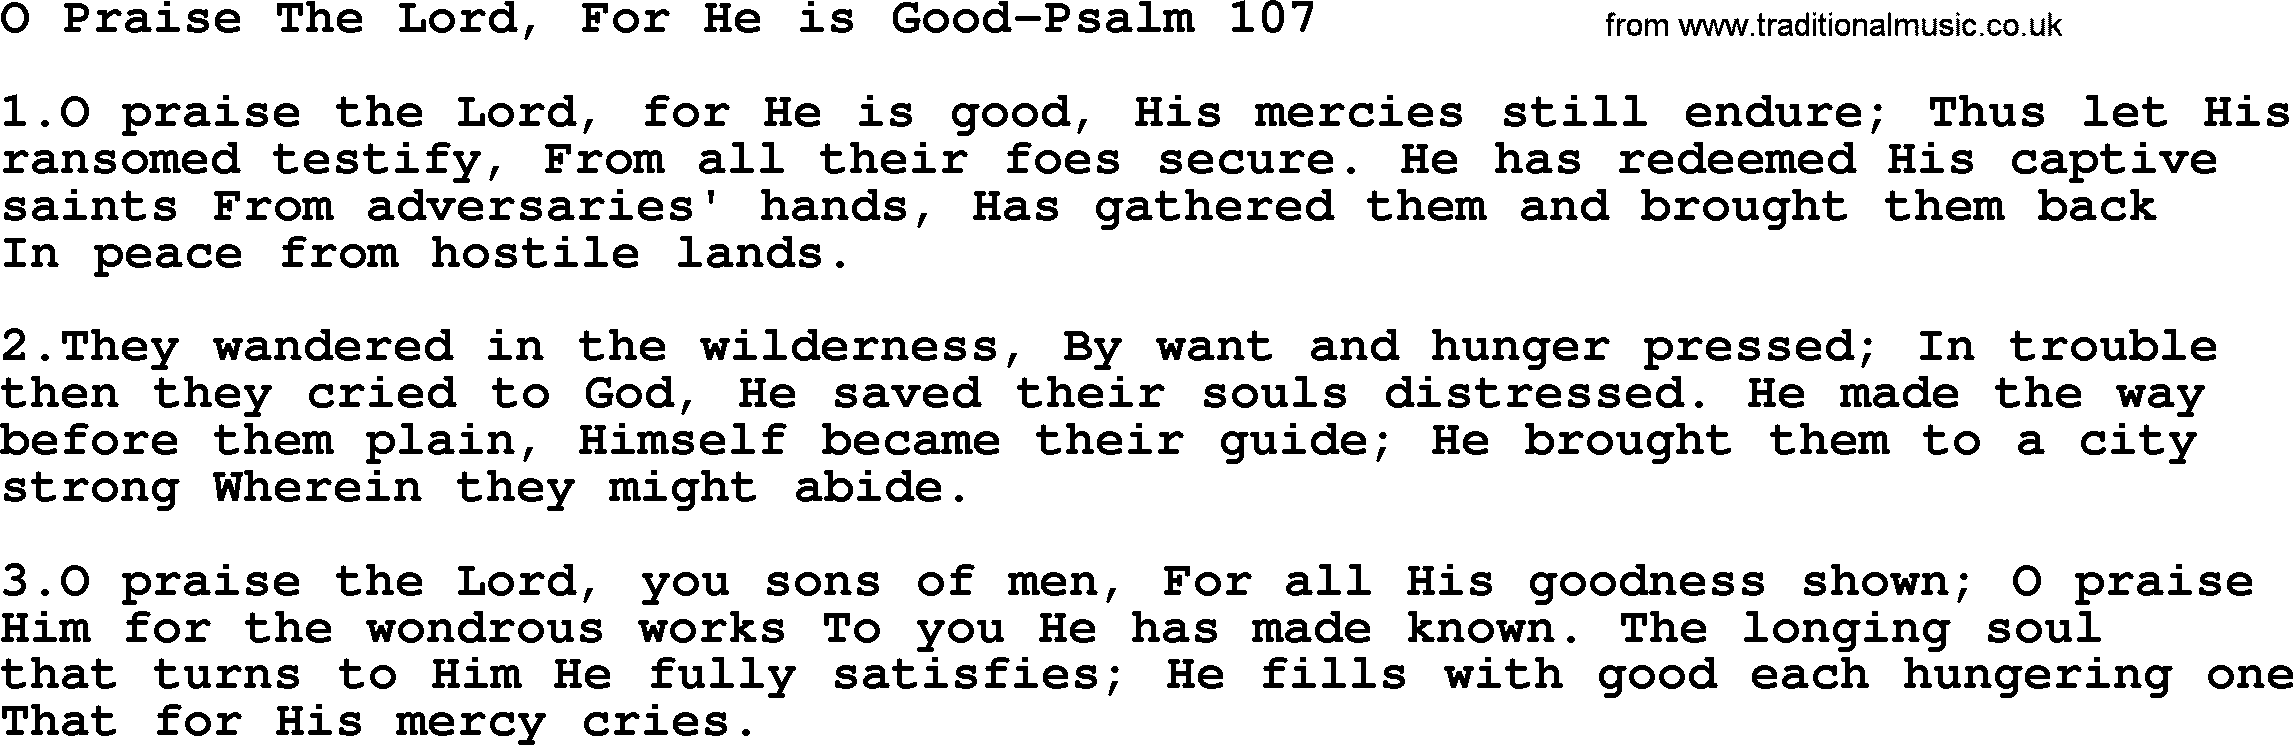 Hymns from the Psalms, Hymn: O Praise The Lord, For He Is Good-Psalm 107, lyrics with PDF